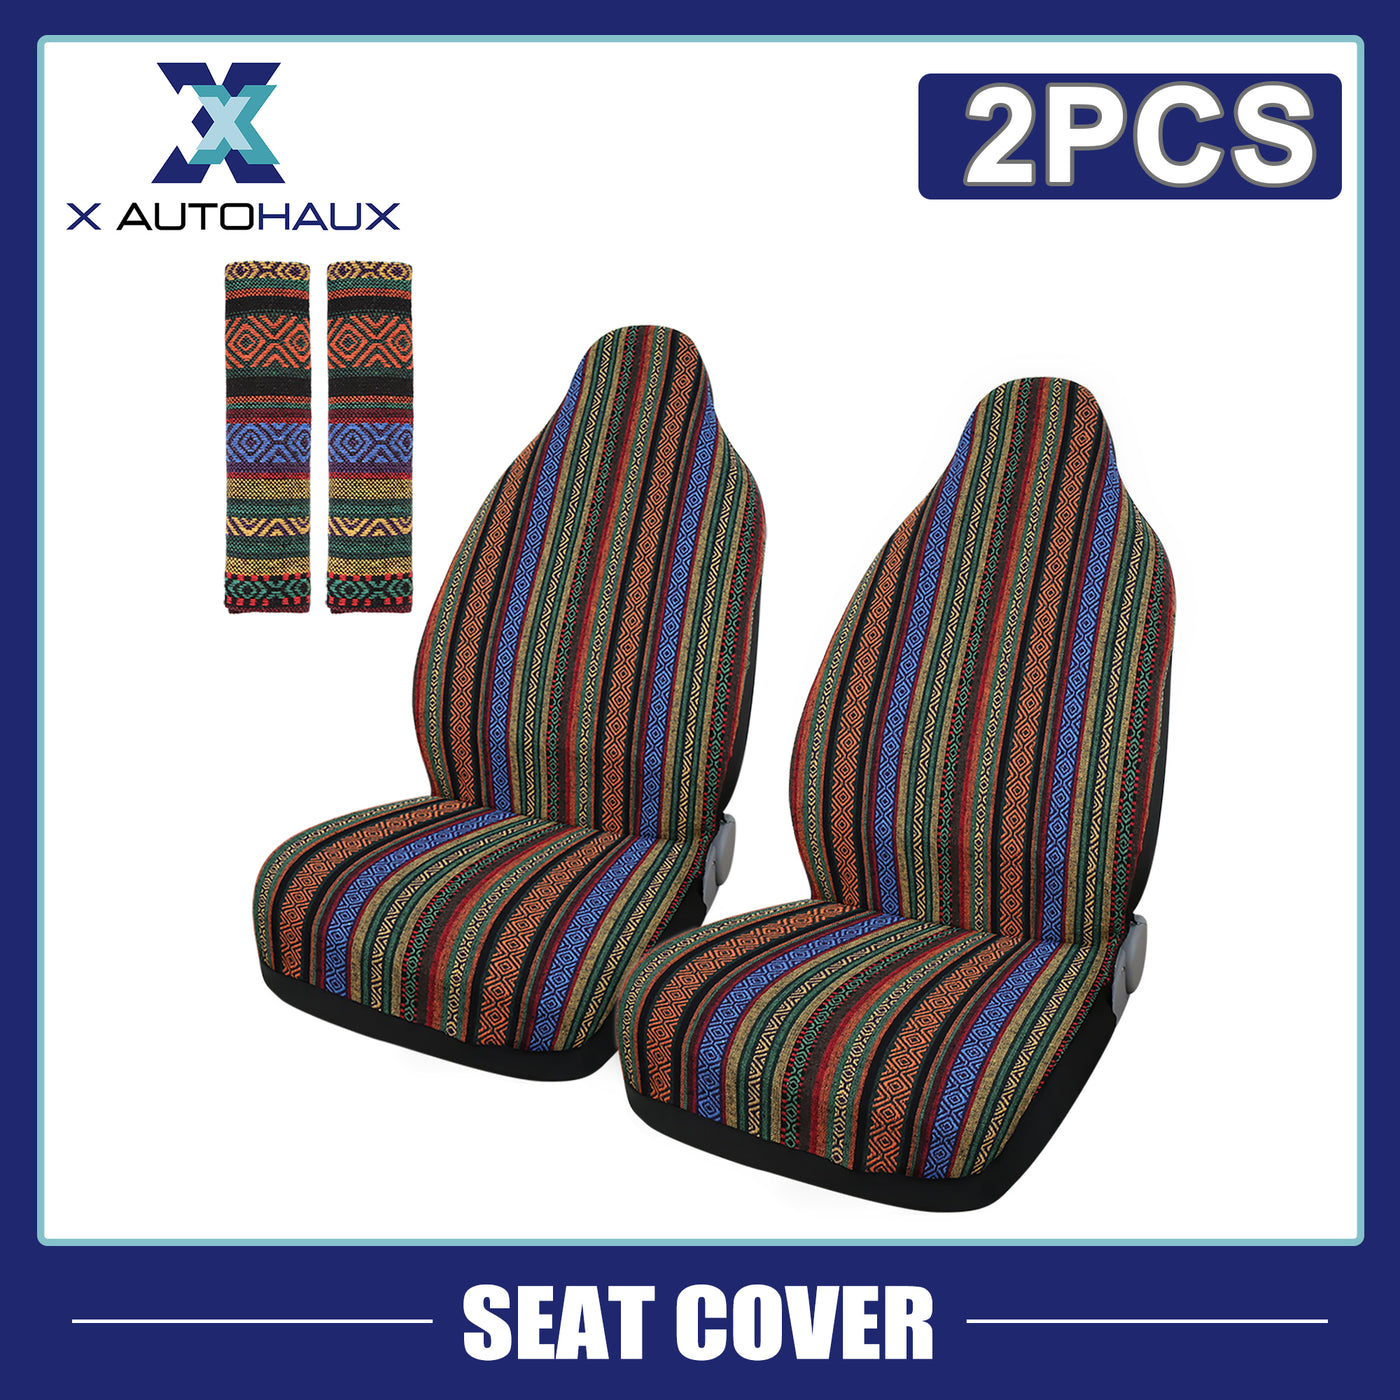 X AUTOHAUX 2pcs Universal Front Seat Cover Baja Saddle Blanket Seat Cover Protectors with 2 Seat Belt Pad